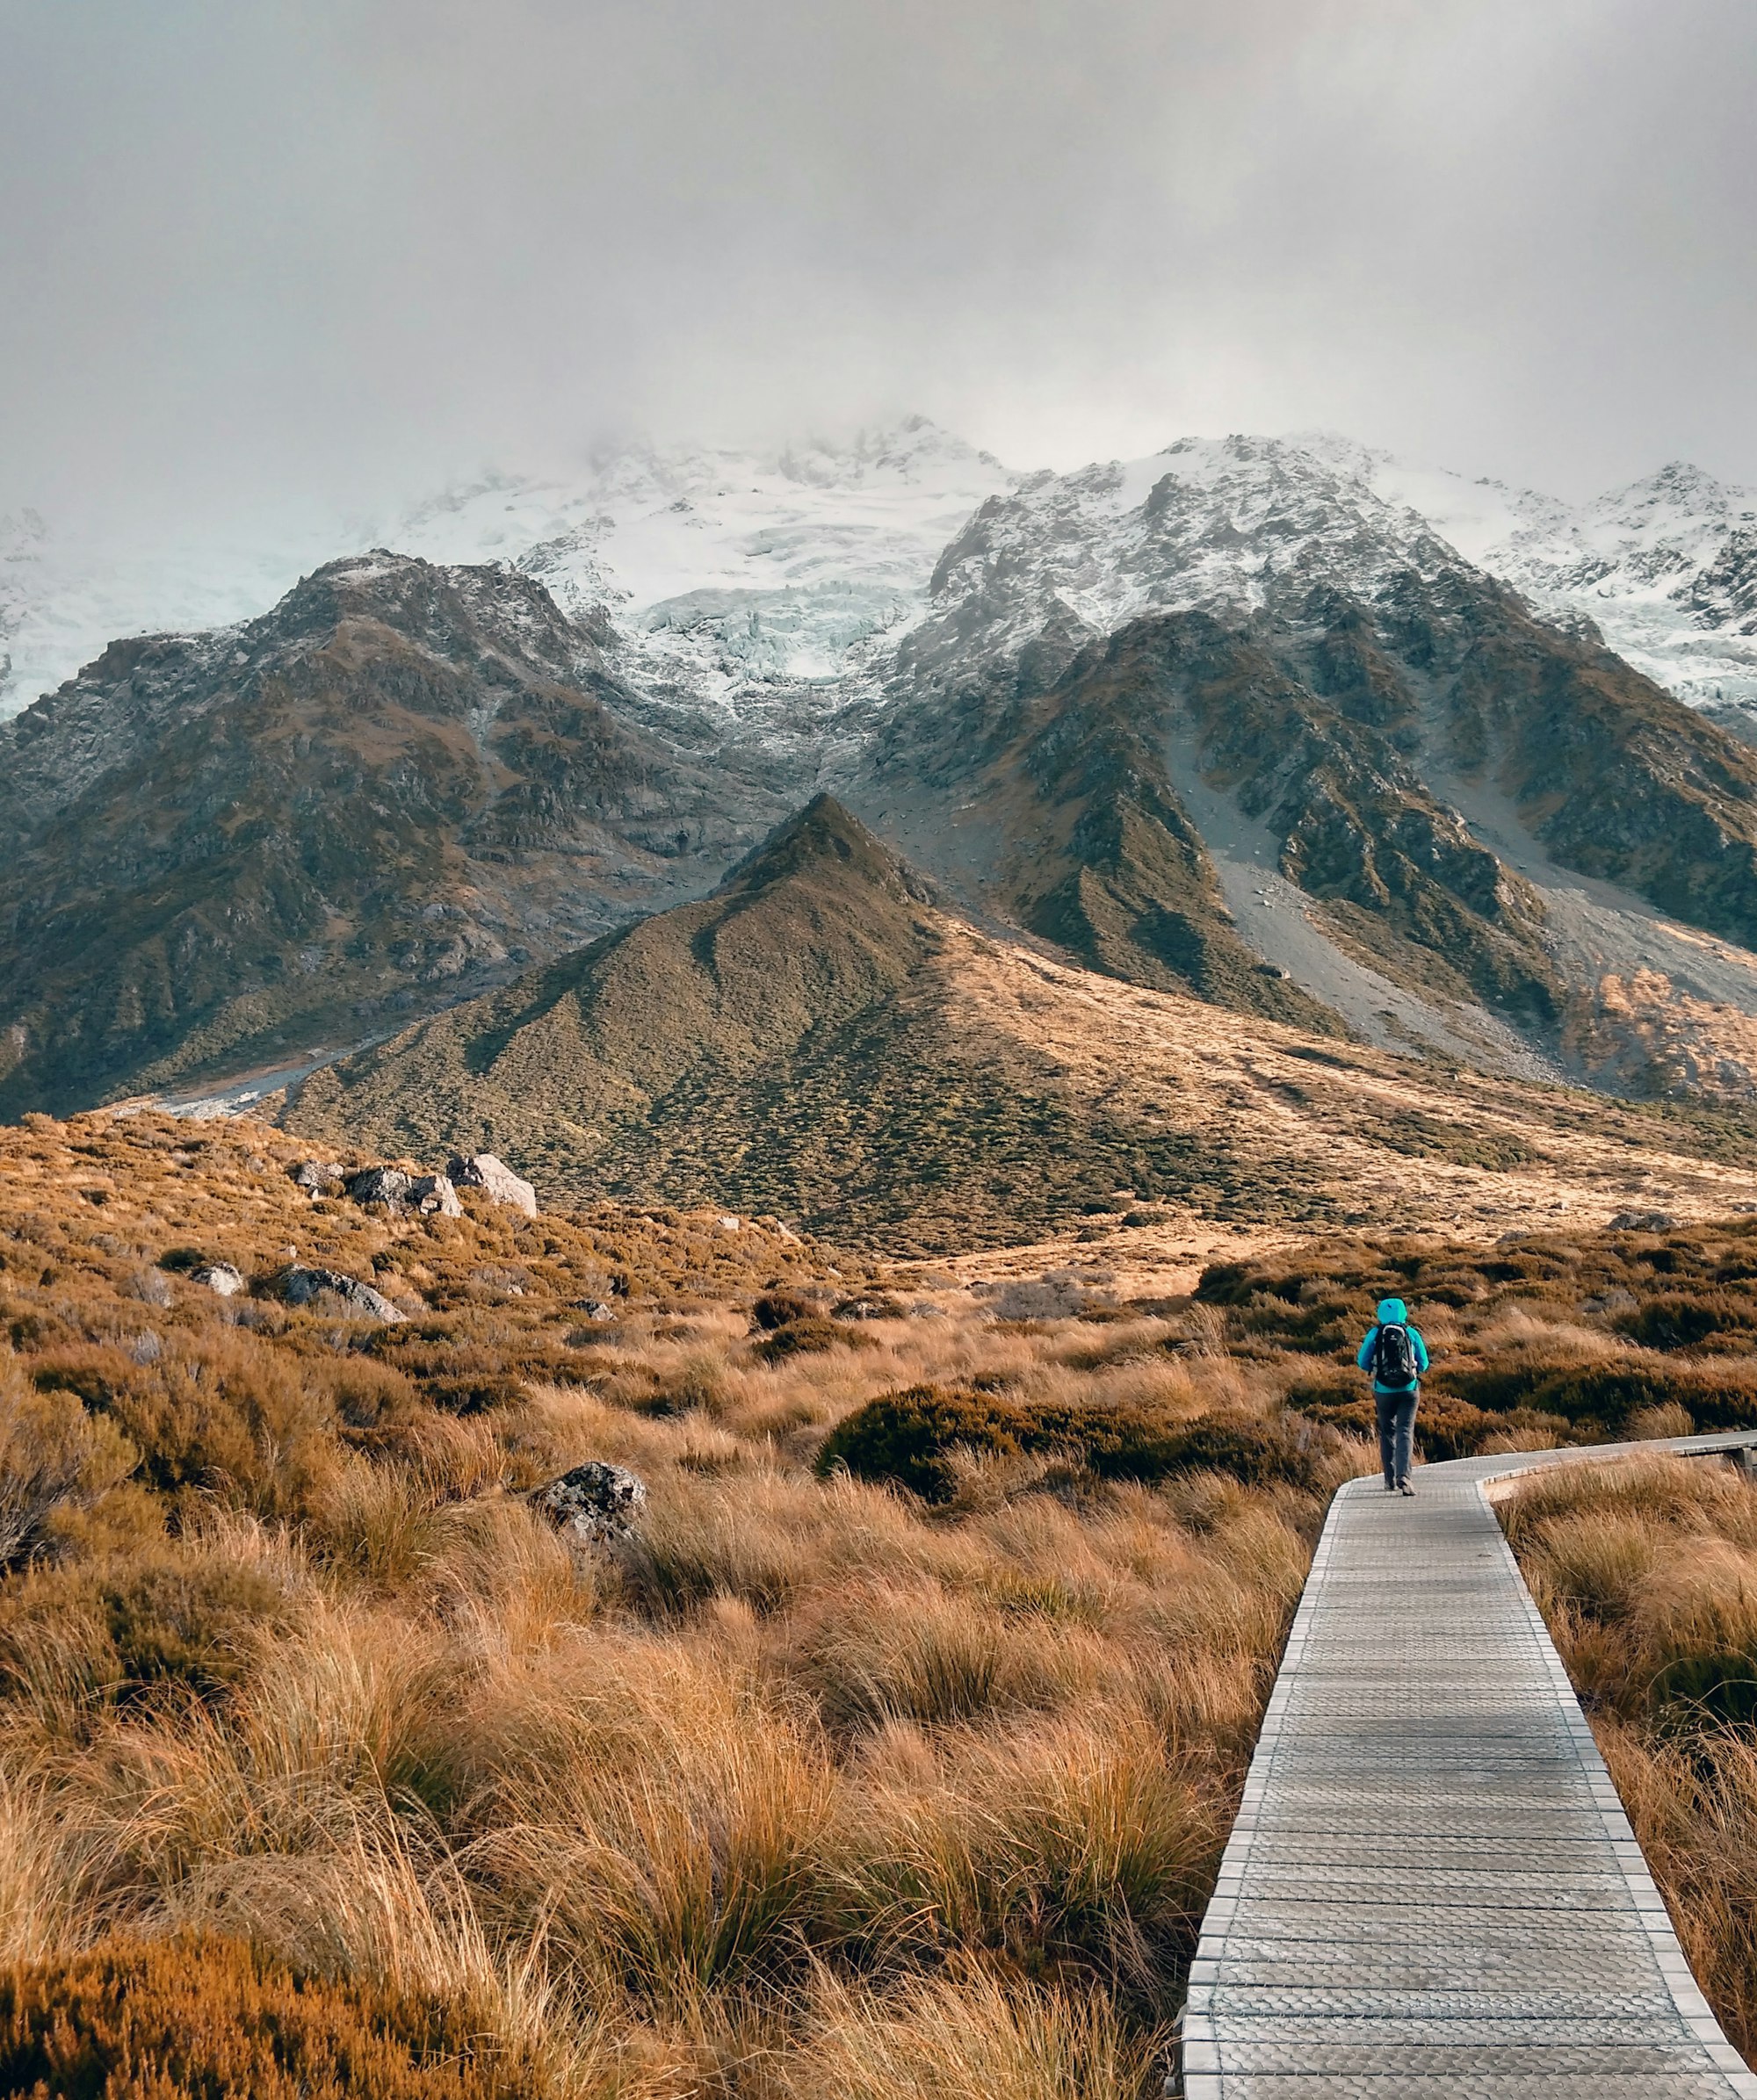 We were on our way to Hooker Lake in New Zealand. While hiking we realized that path to the location is more magnificent than the lake itself.